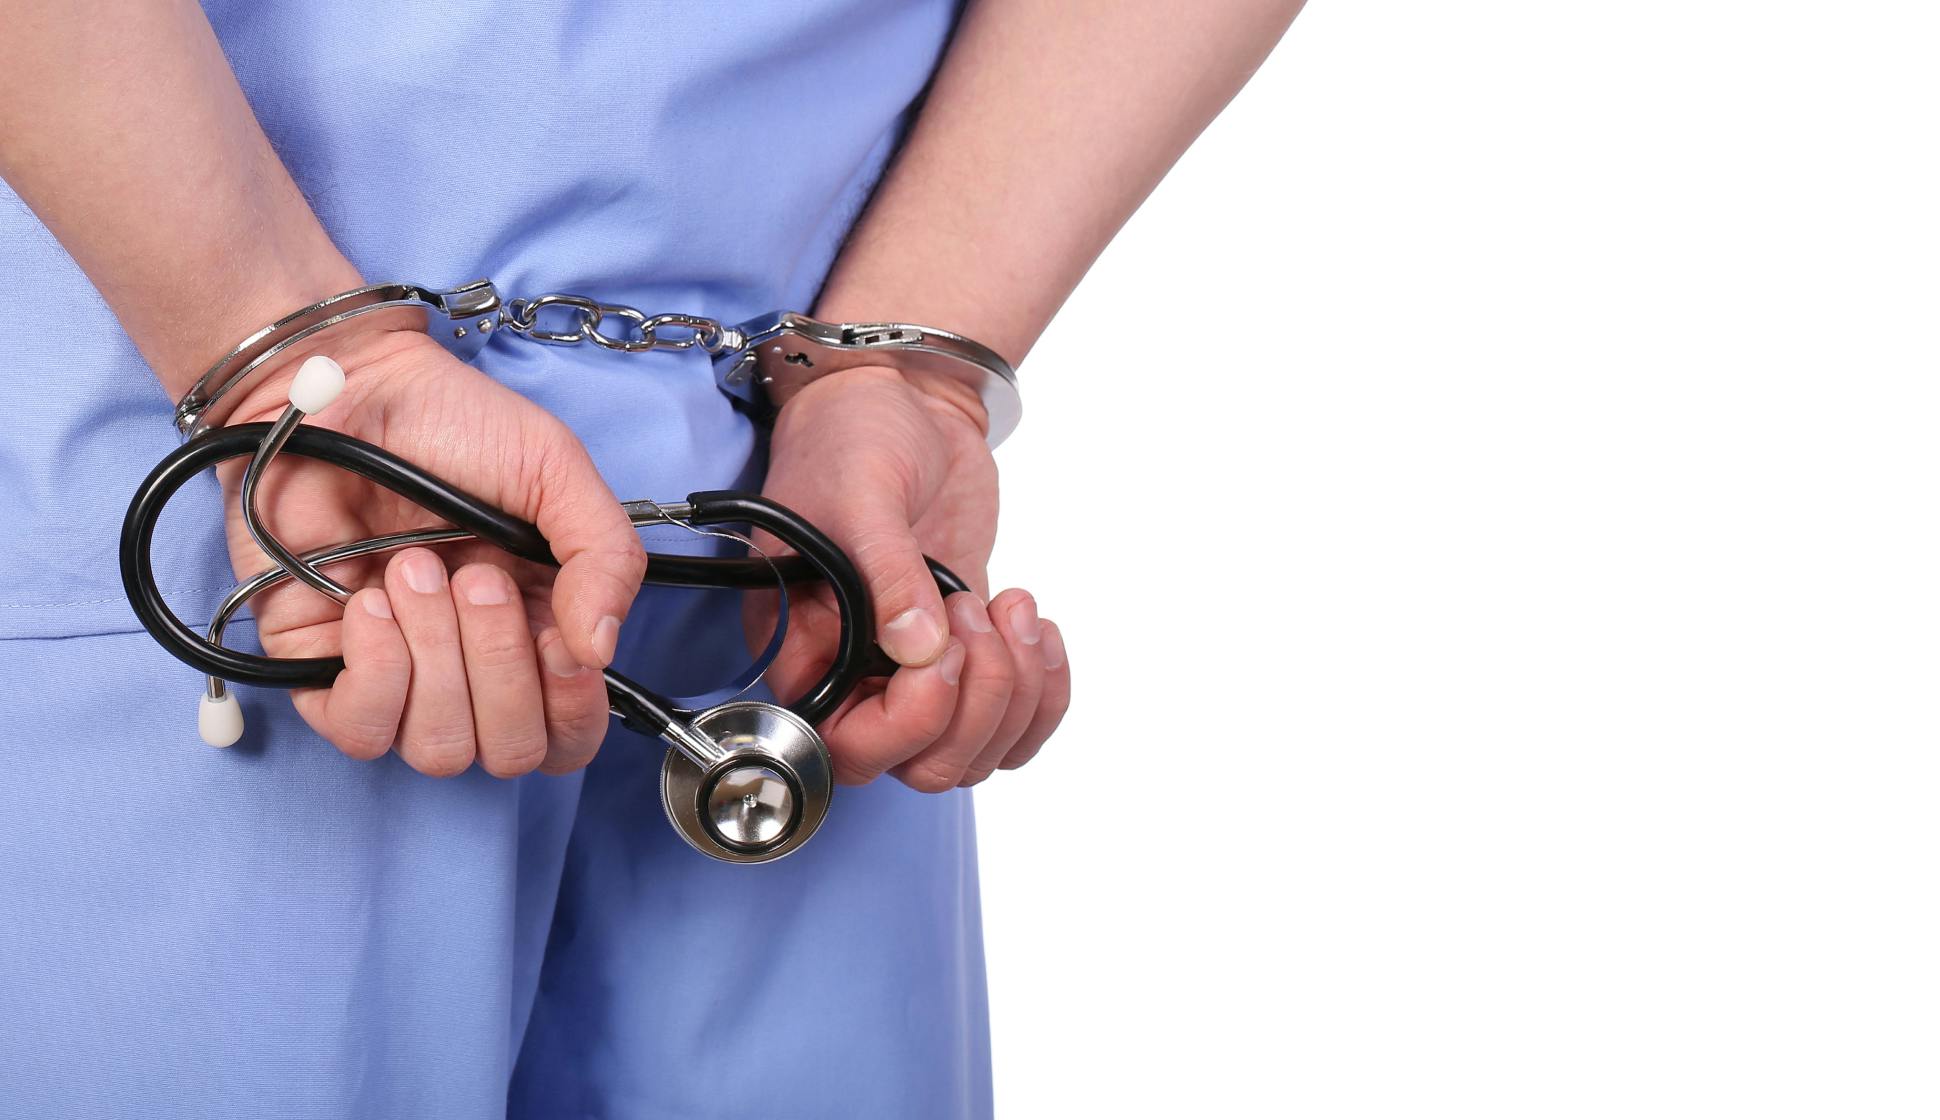 A doctor in handcuffs with a stethoskop in his hands